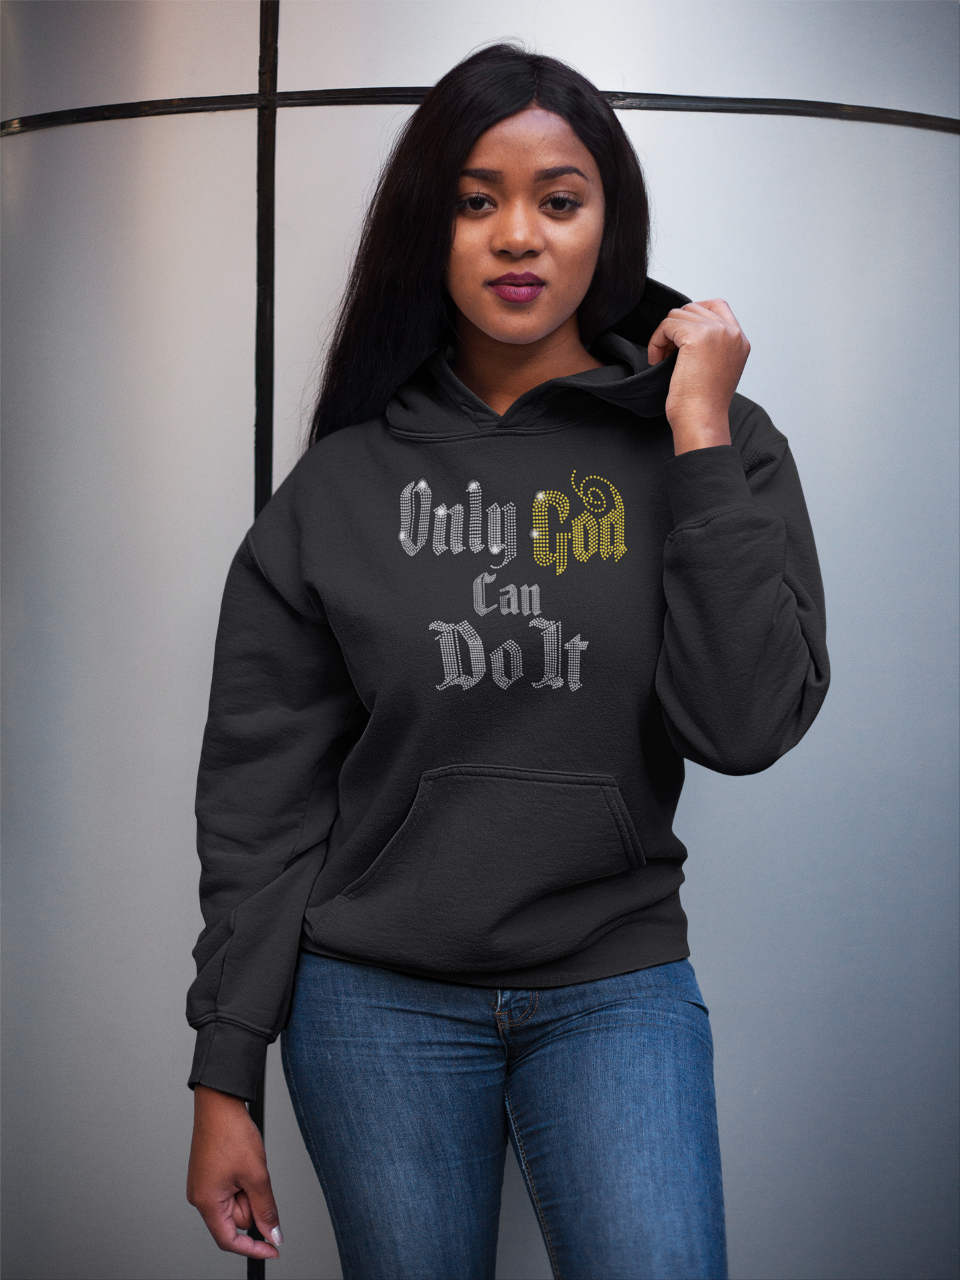 Only God Can Do It - Women - Happy Fashion Time Store